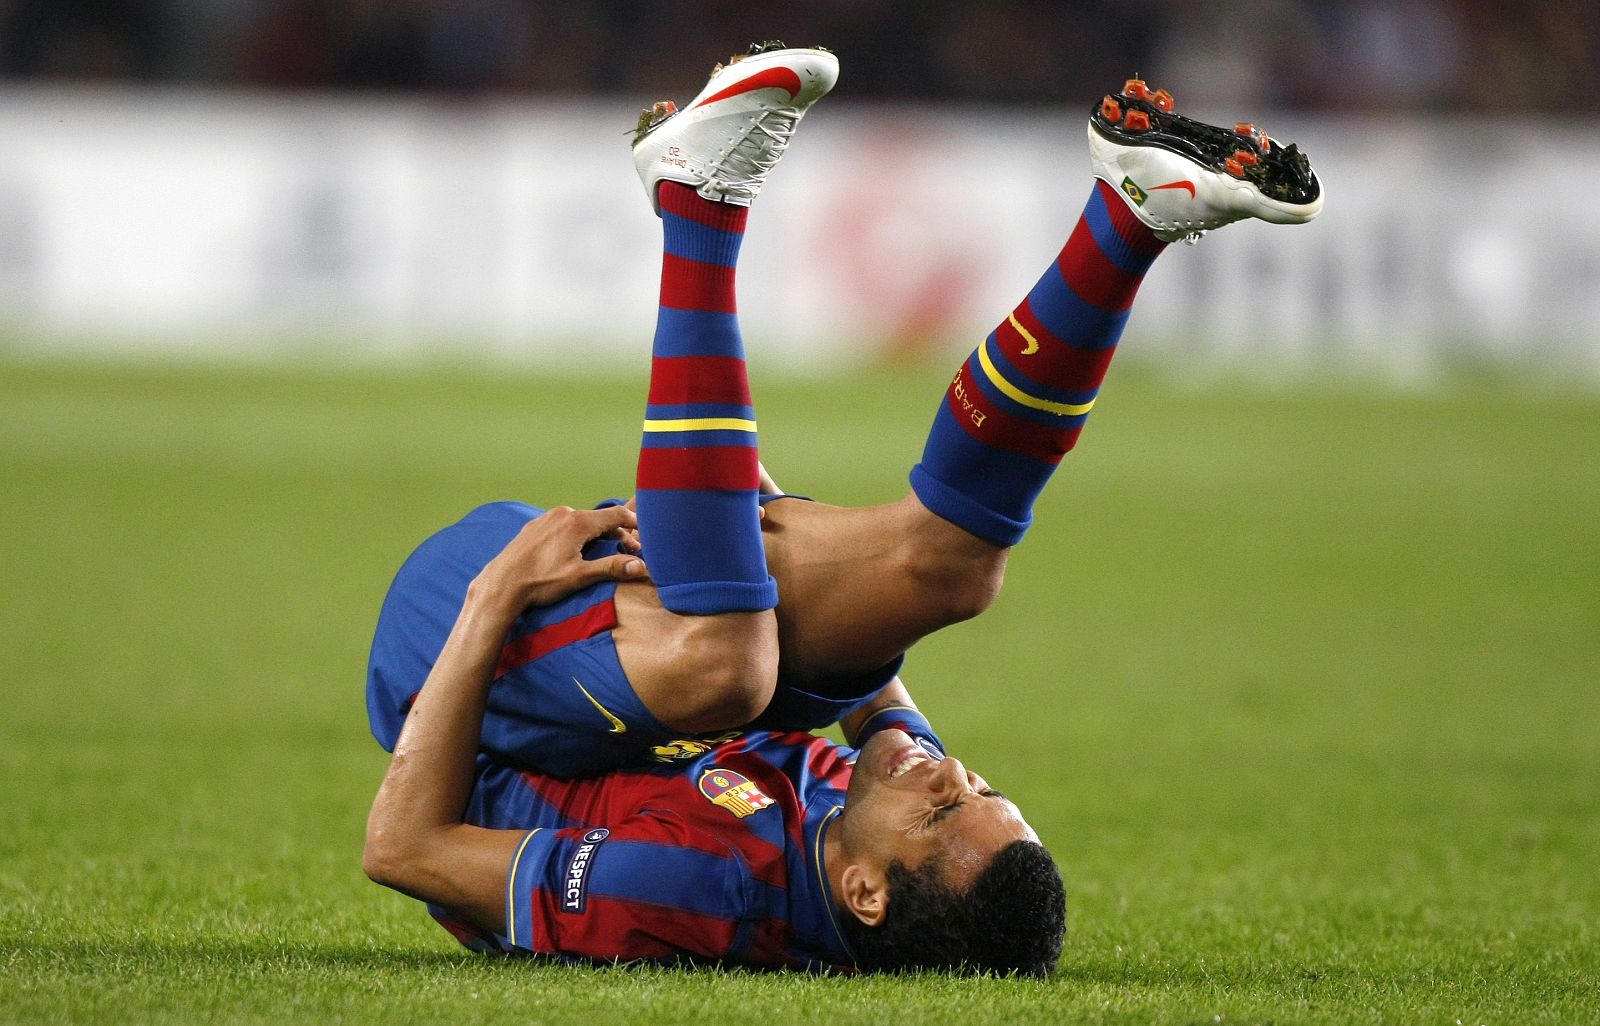 Barcelona's Dani Alves grimaces after being tackled by a Rubin Kazan player during their Champions League soccer match at the Camp Nou stadium in Barcelona